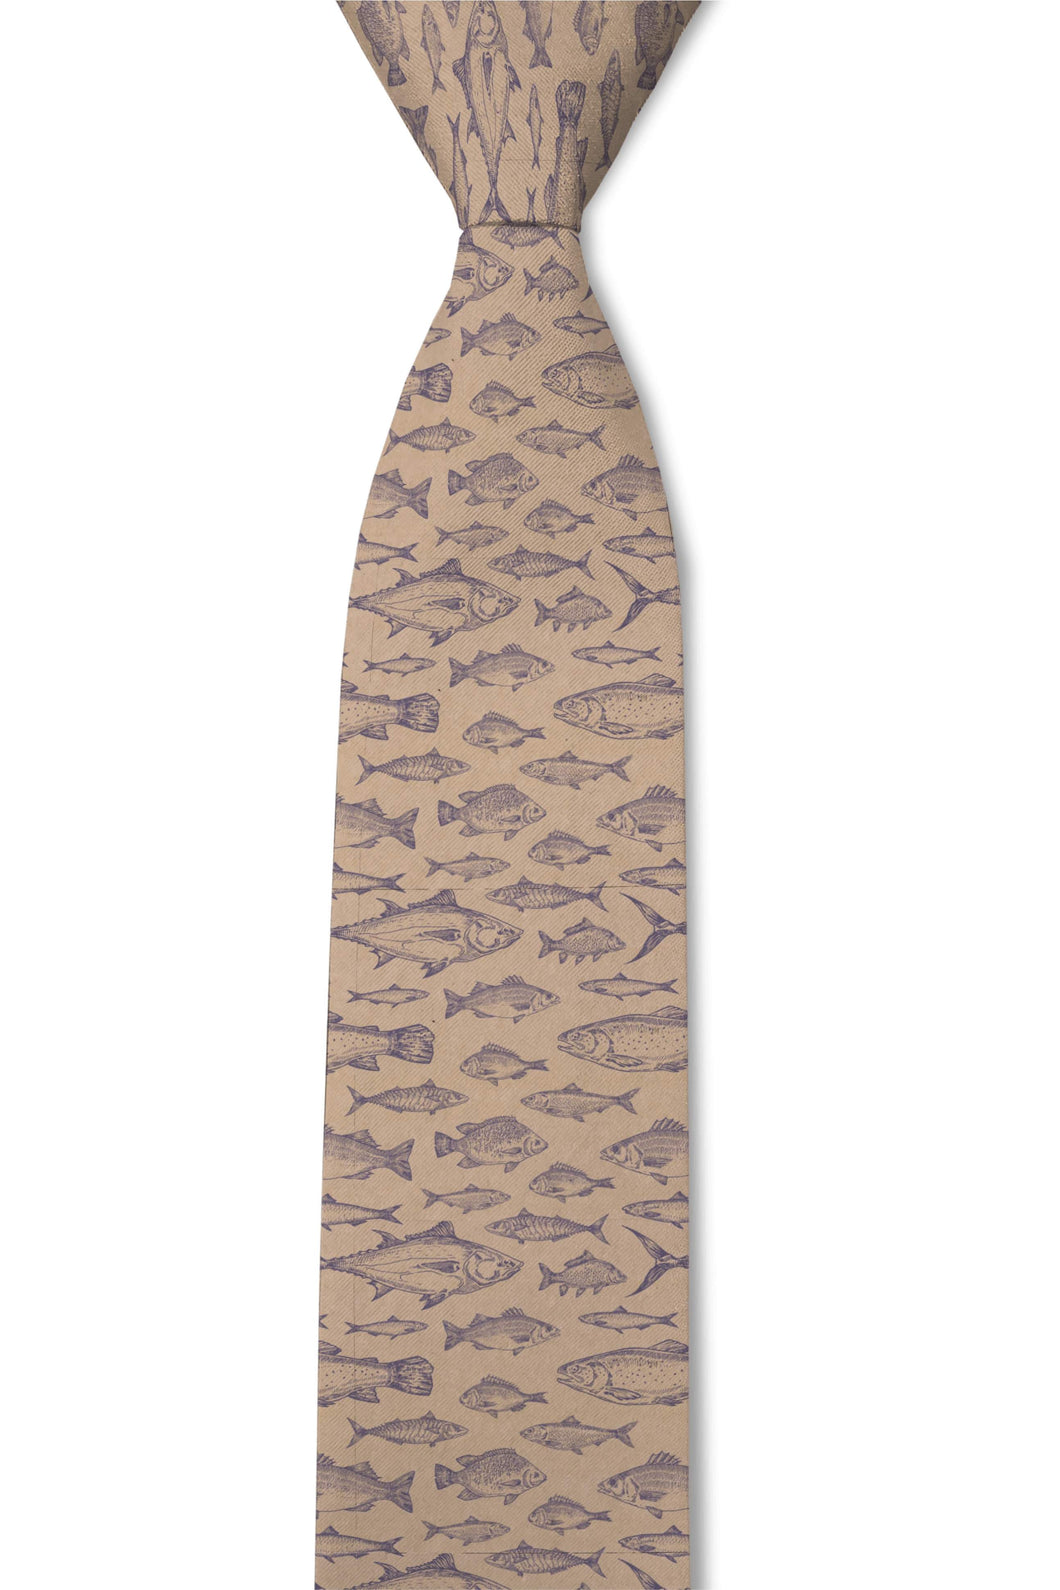 Angler missionary tie